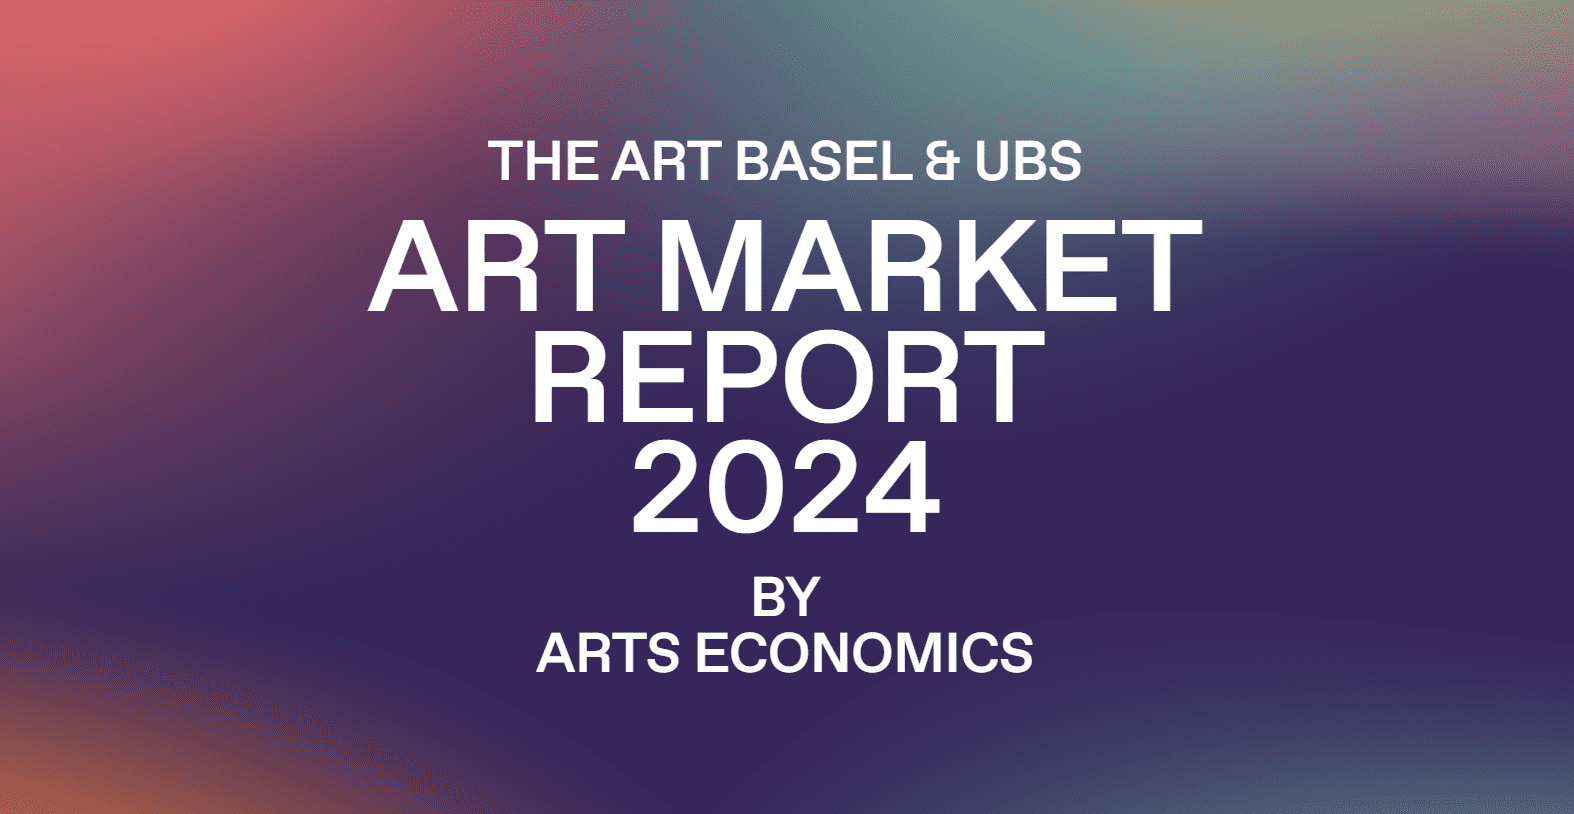 The 2024 Art Market: Resilience and Realignment in the Face of Change